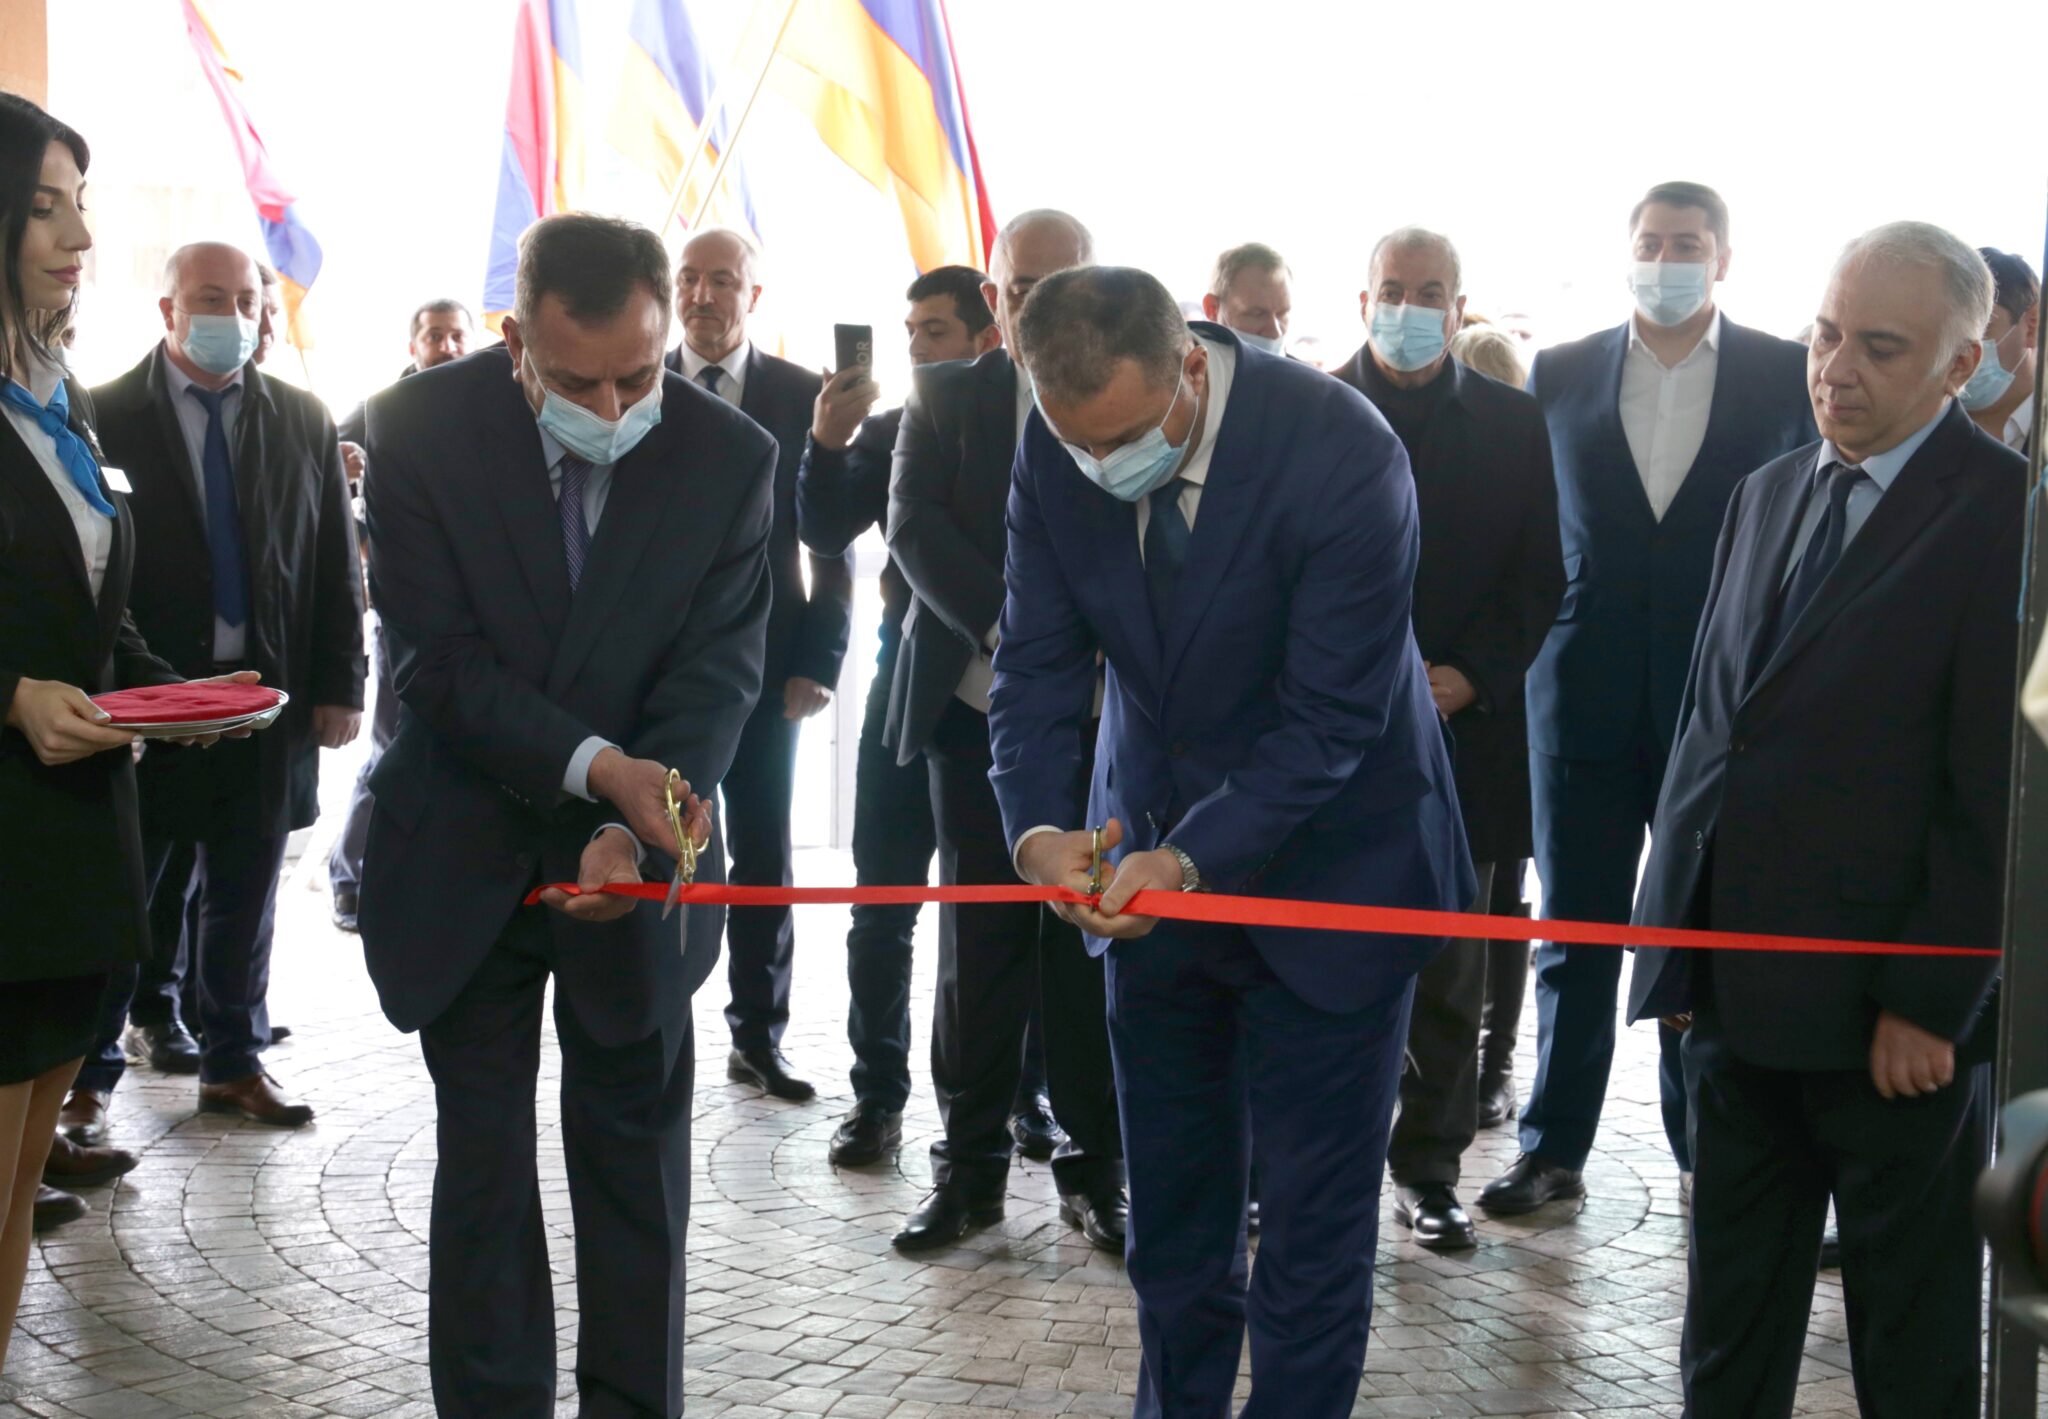 Caucasus: Construction and Renovation Expo 2021 opens in Yerevan